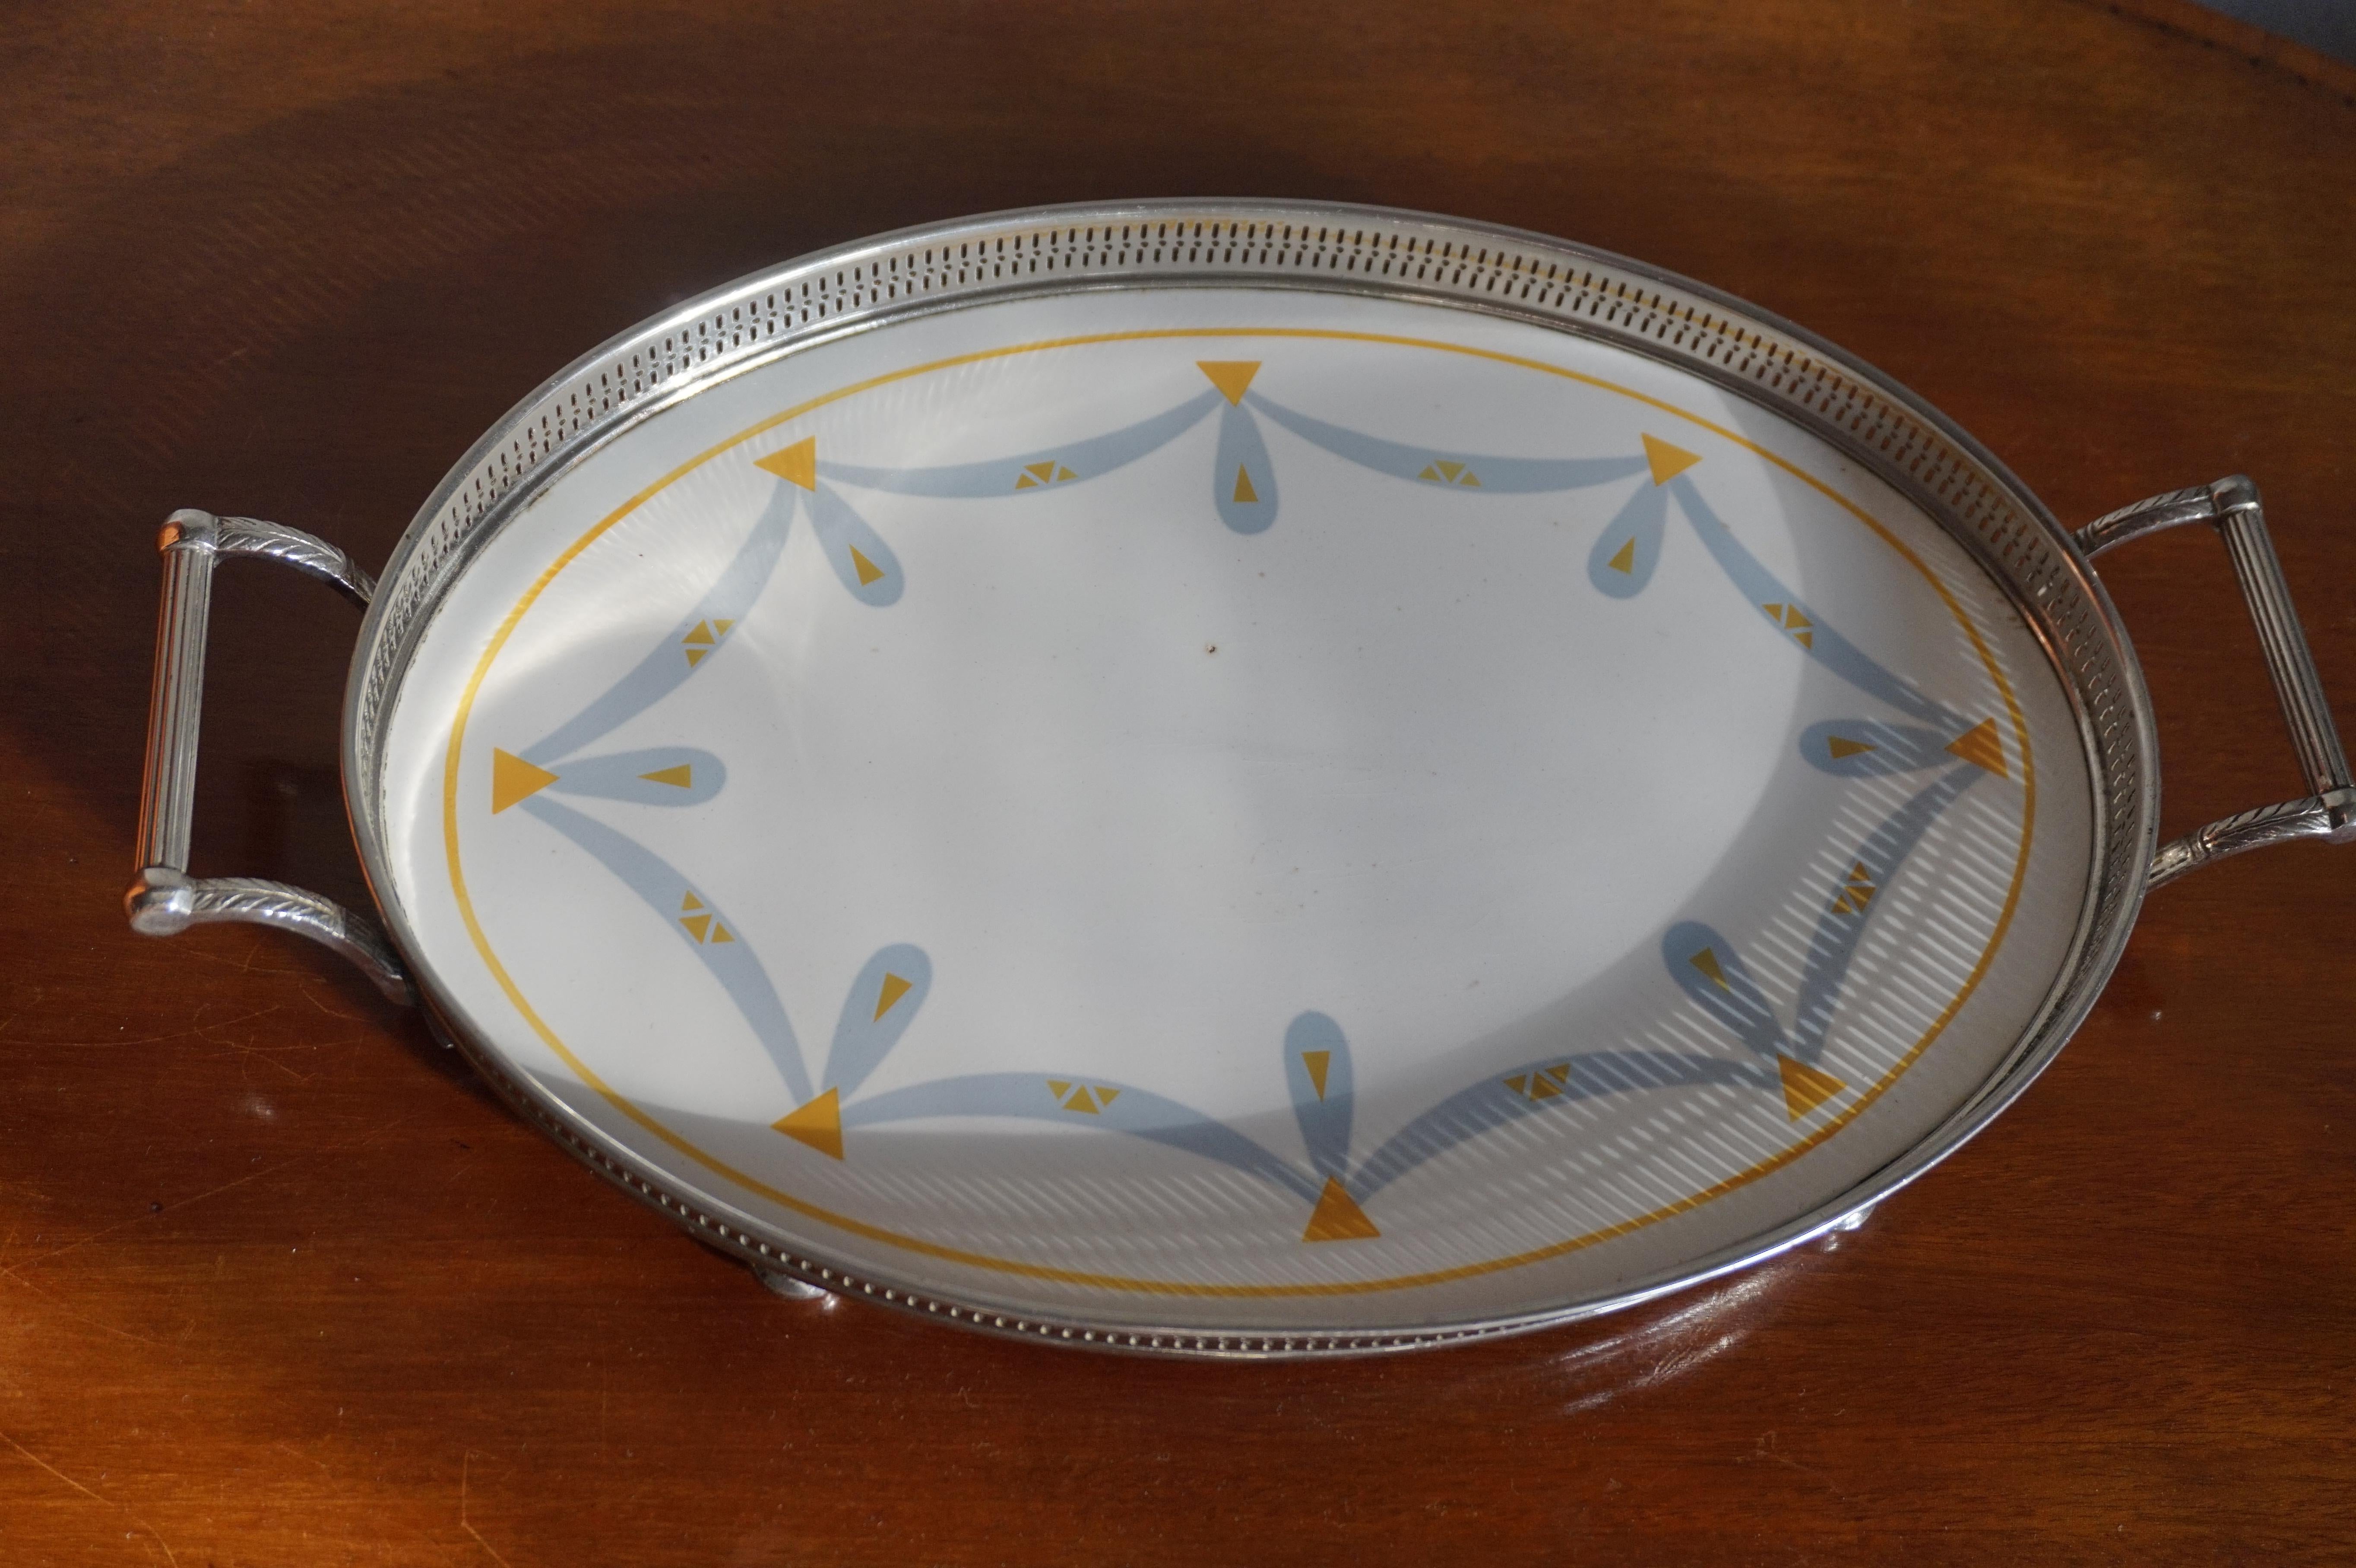 Small Art Deco Oval Porcelain Tile Serving Tray with Stylish Yellow & Gray Motif For Sale 11